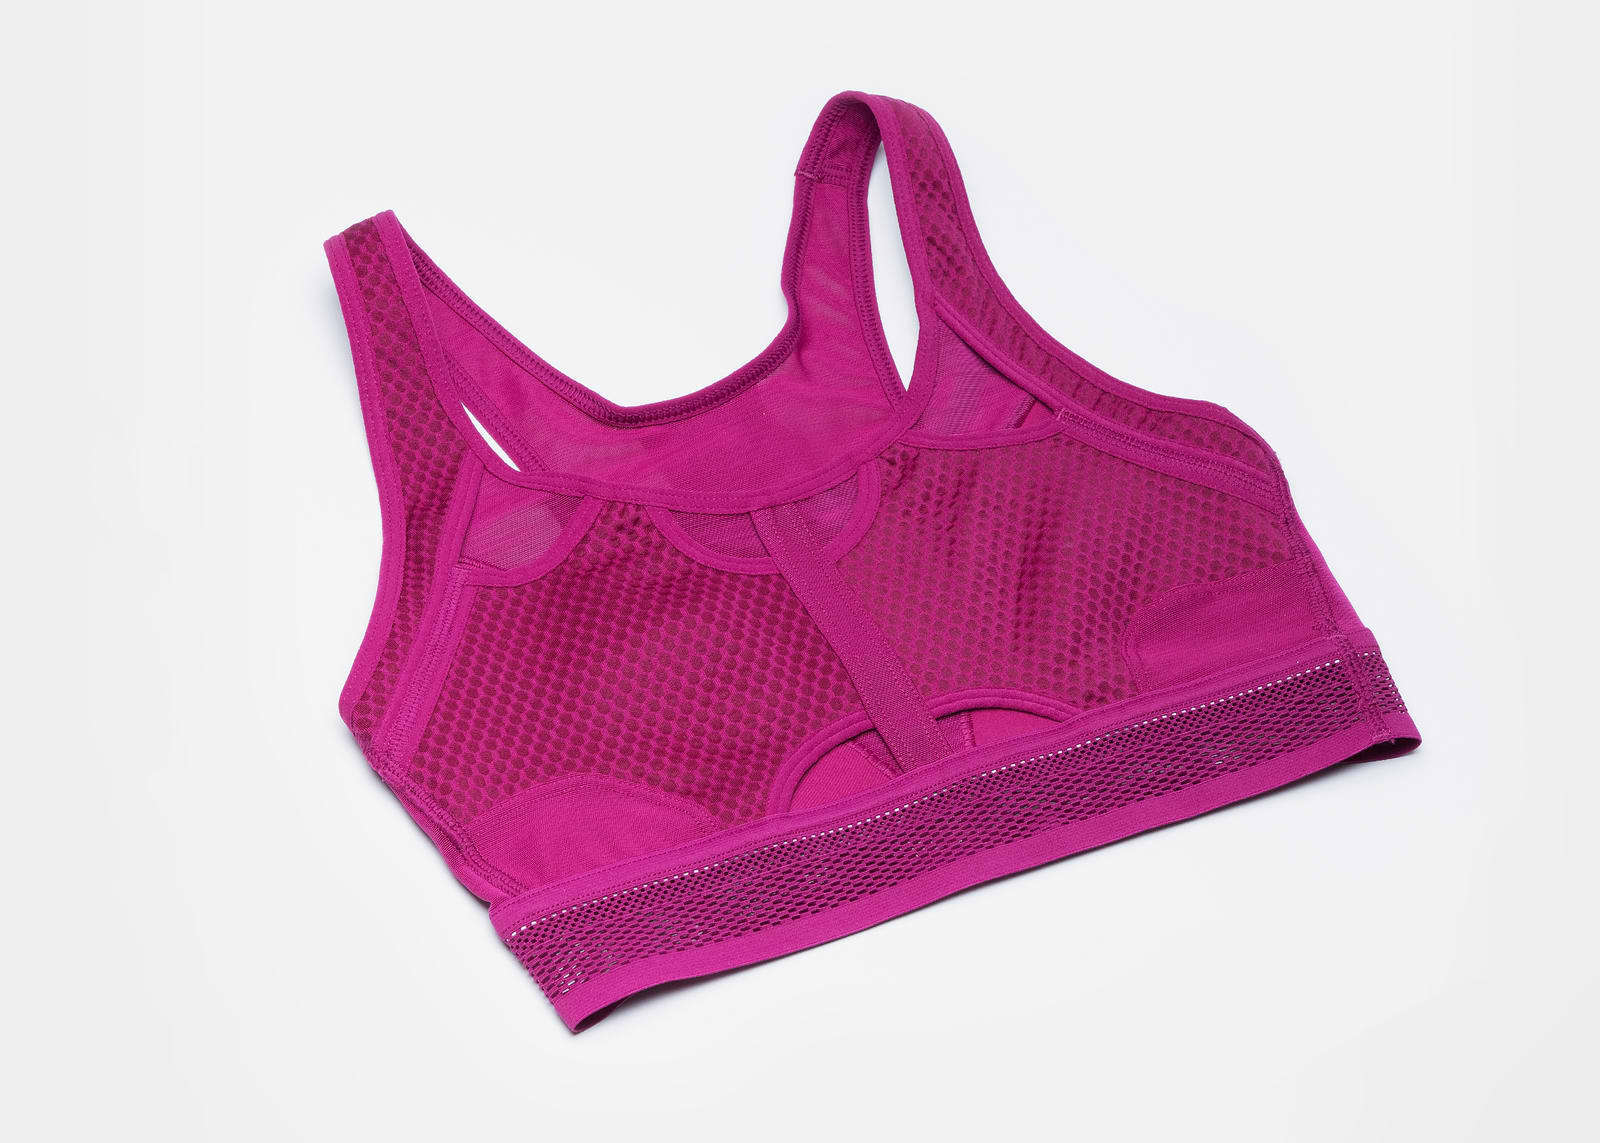 How to Wash your Sports Bras